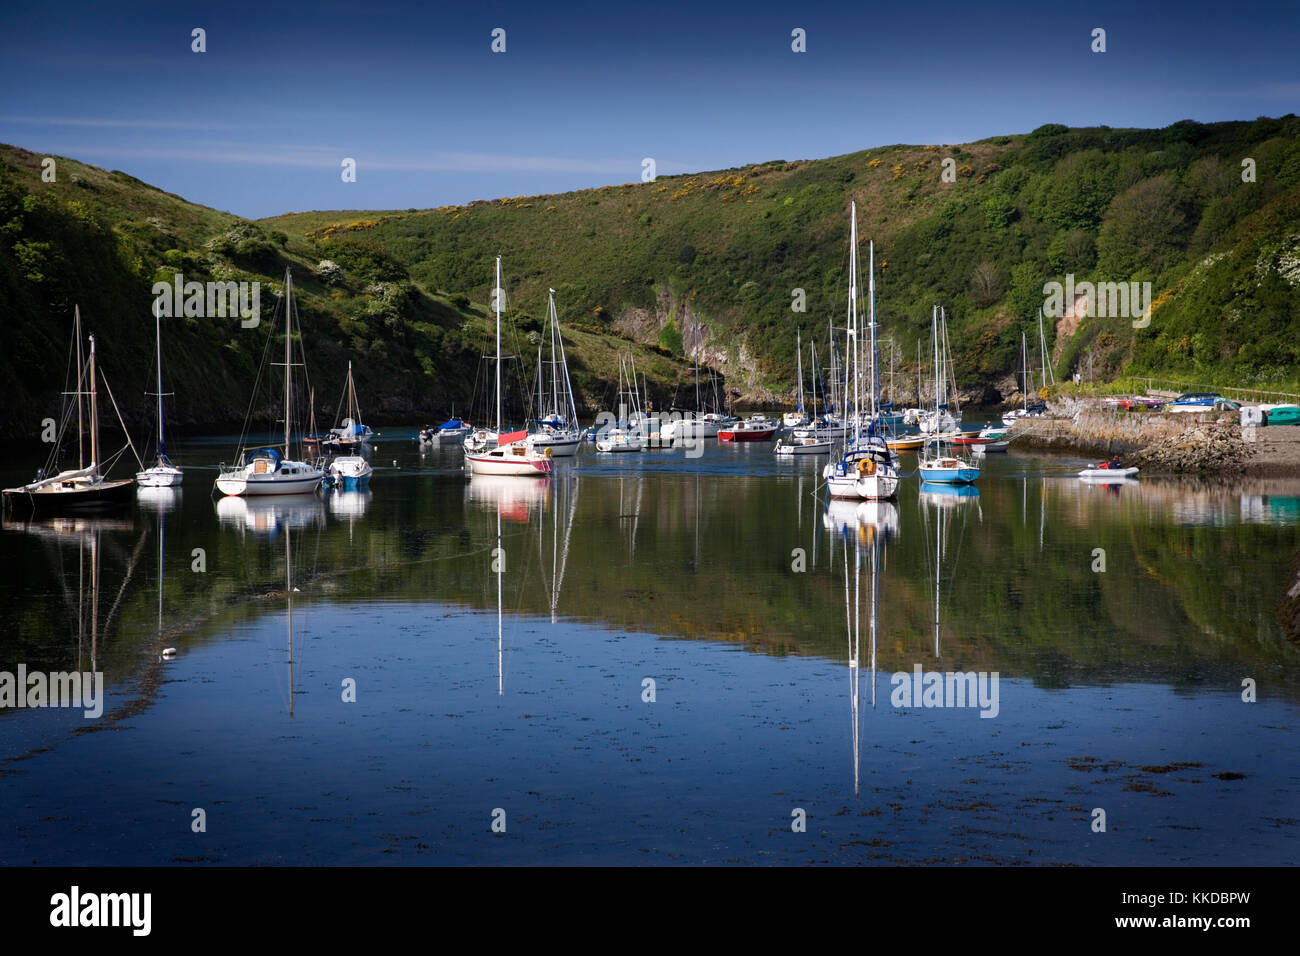 Solva harbour, Pembrokeshire, Wales, UK with small boats at anchor and reflections in the perfectly still water on a beautiful summer morning Stock Photo